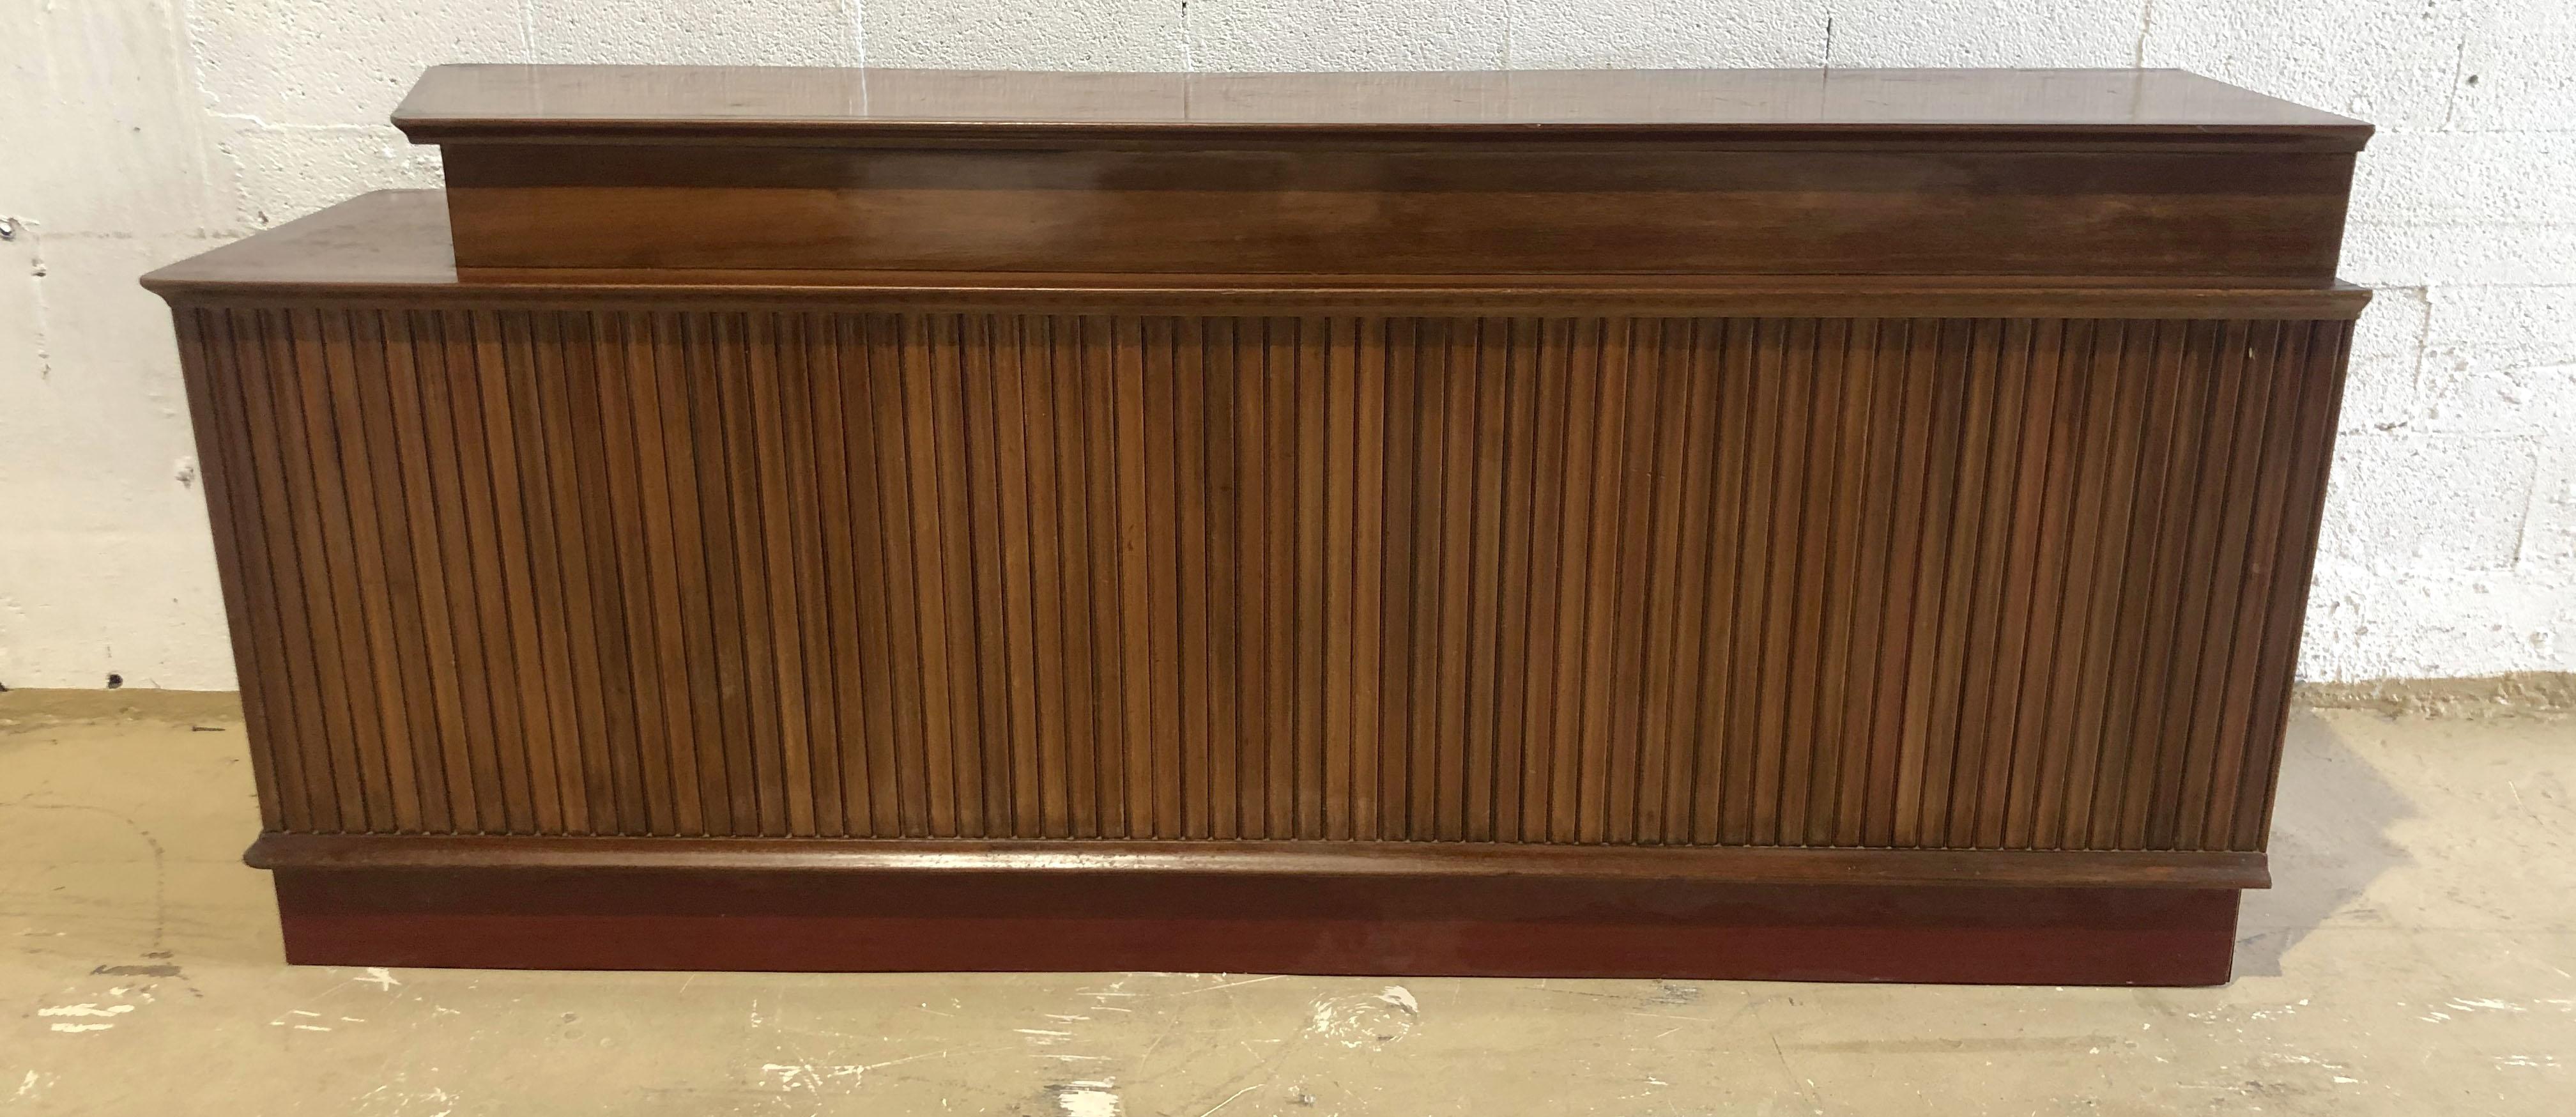 Rare room divider/ free standing credenza/ buffet/ bar/ finished on all sides- one side with 3 doors and geometric relief cut outs on the doors- the reverse side with reeded fluted motif- the top with 2 levels.